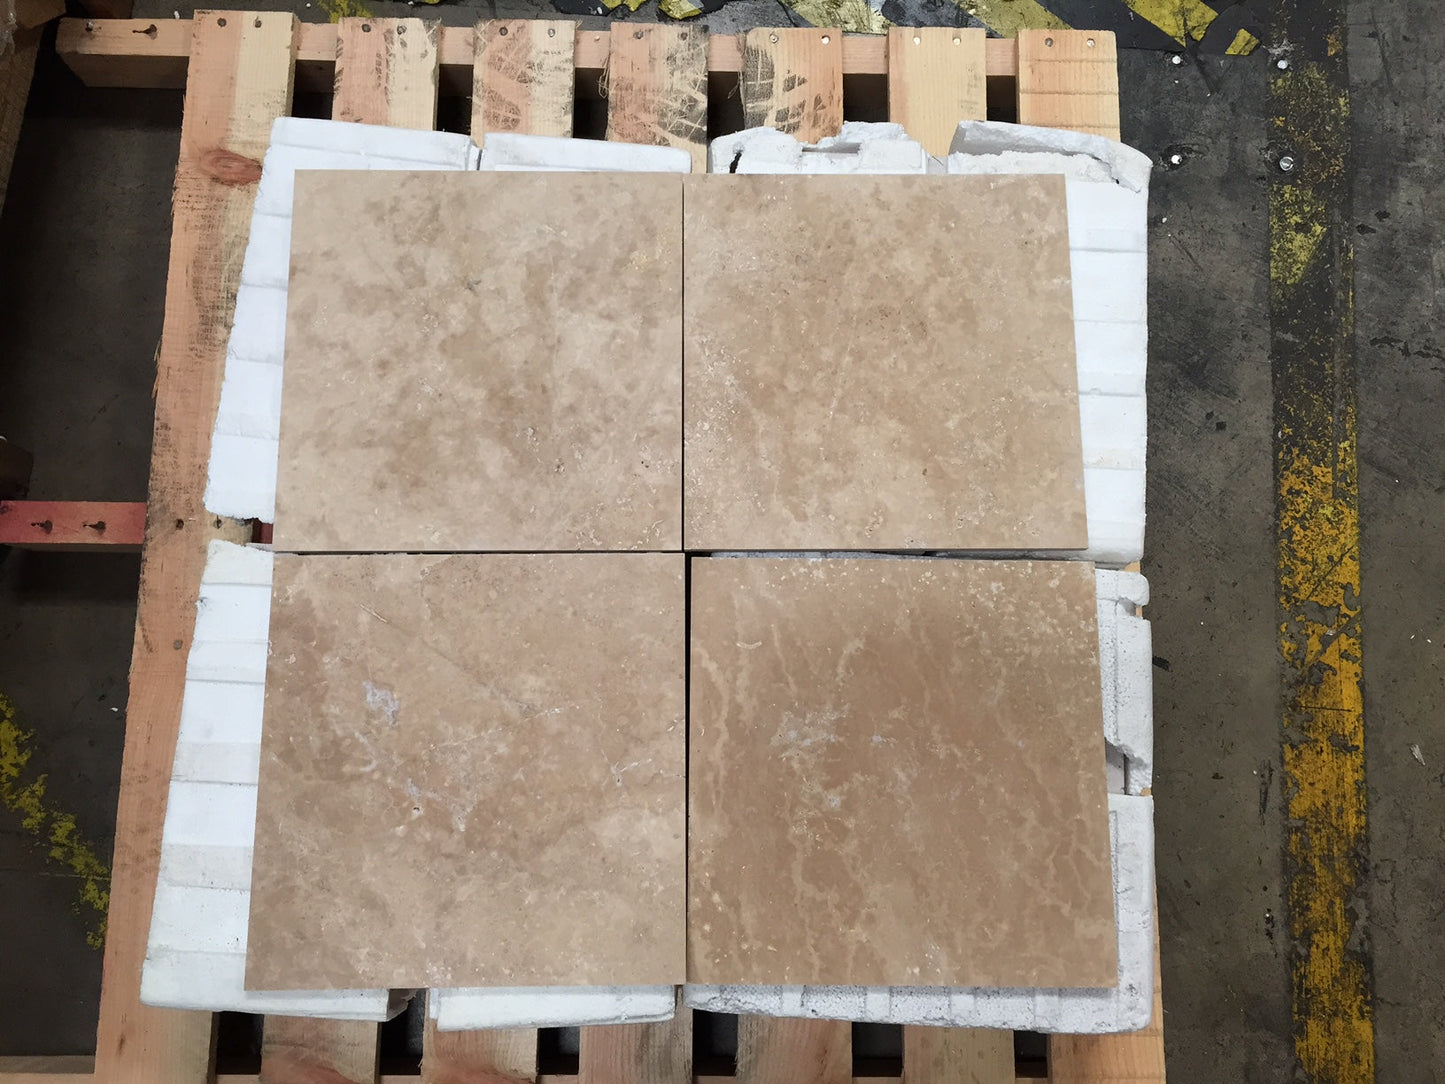 Walnut Travertine Filled & Honed Premium Wall and Floor Tile 12x12"